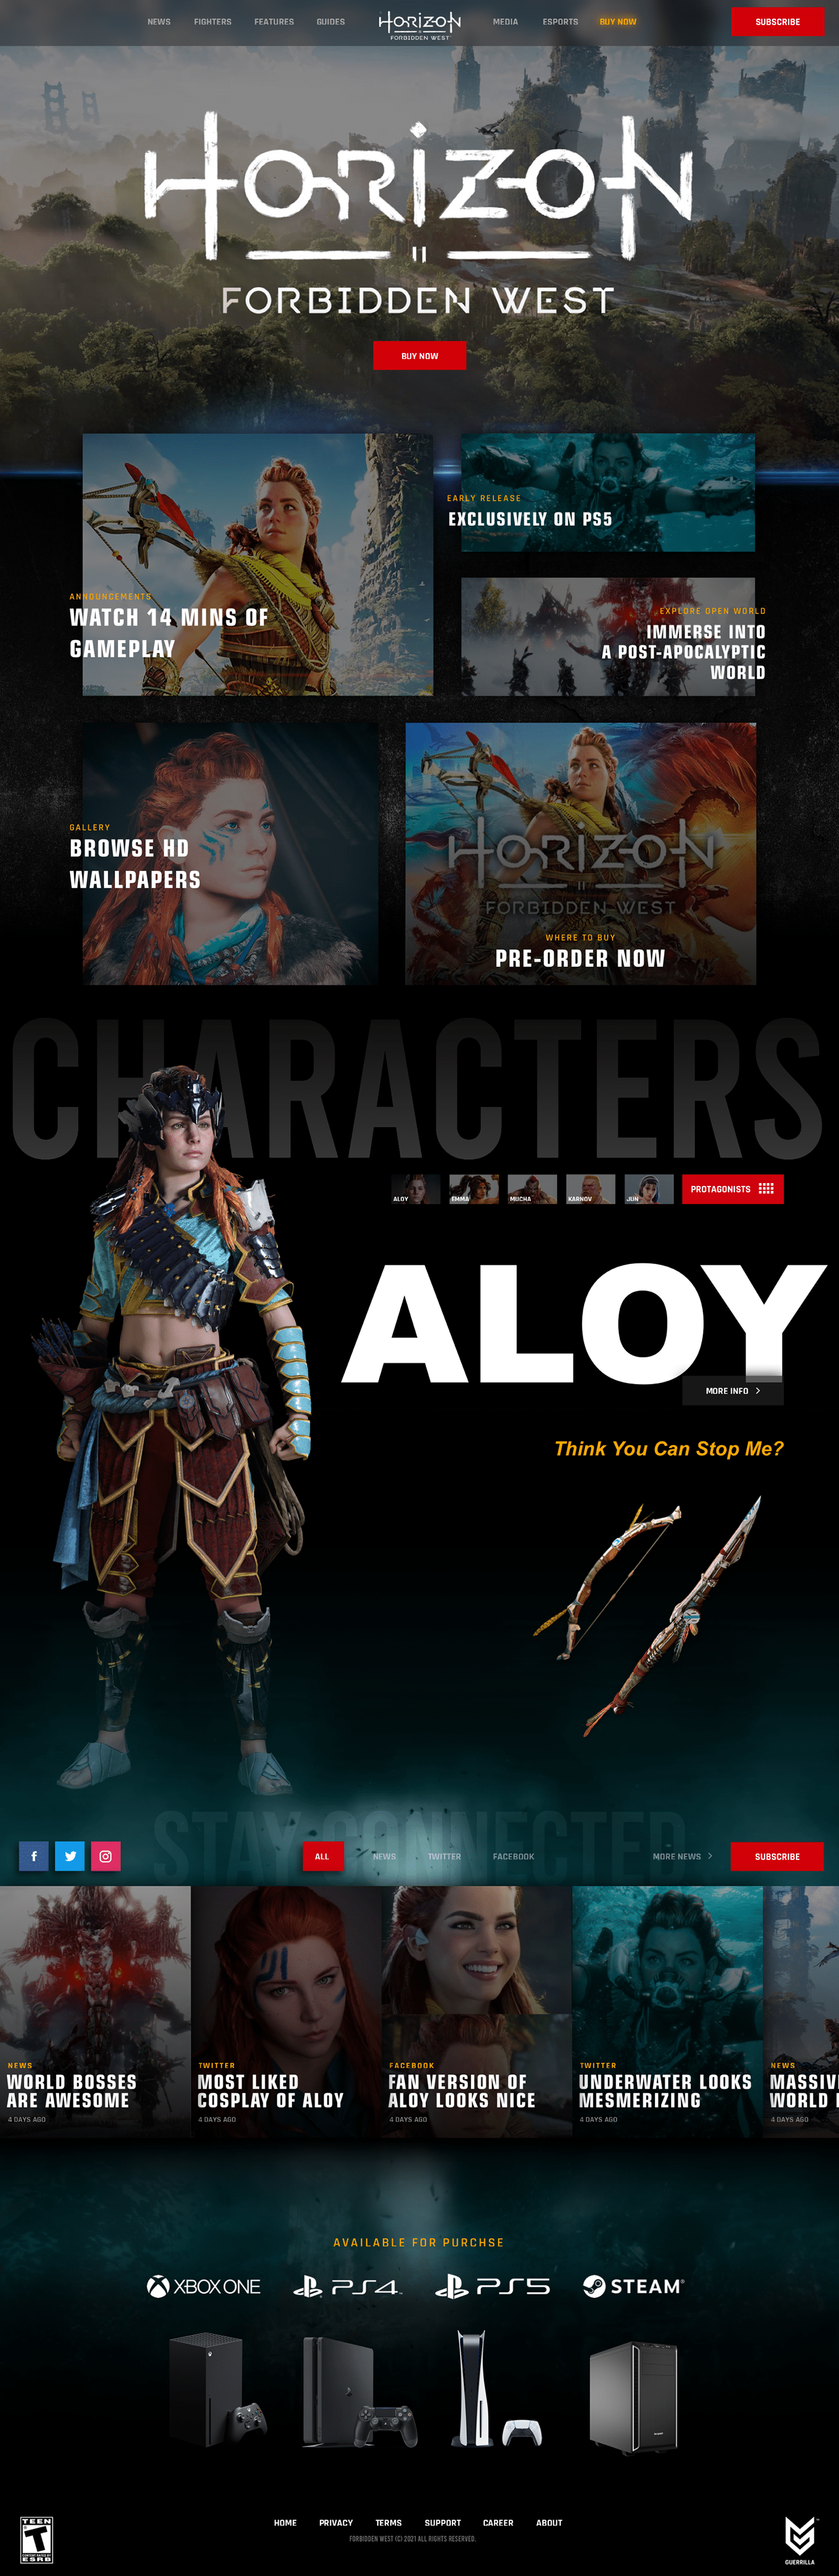 ALOY Forbidden West horizon journey to the west post-apocalyptic